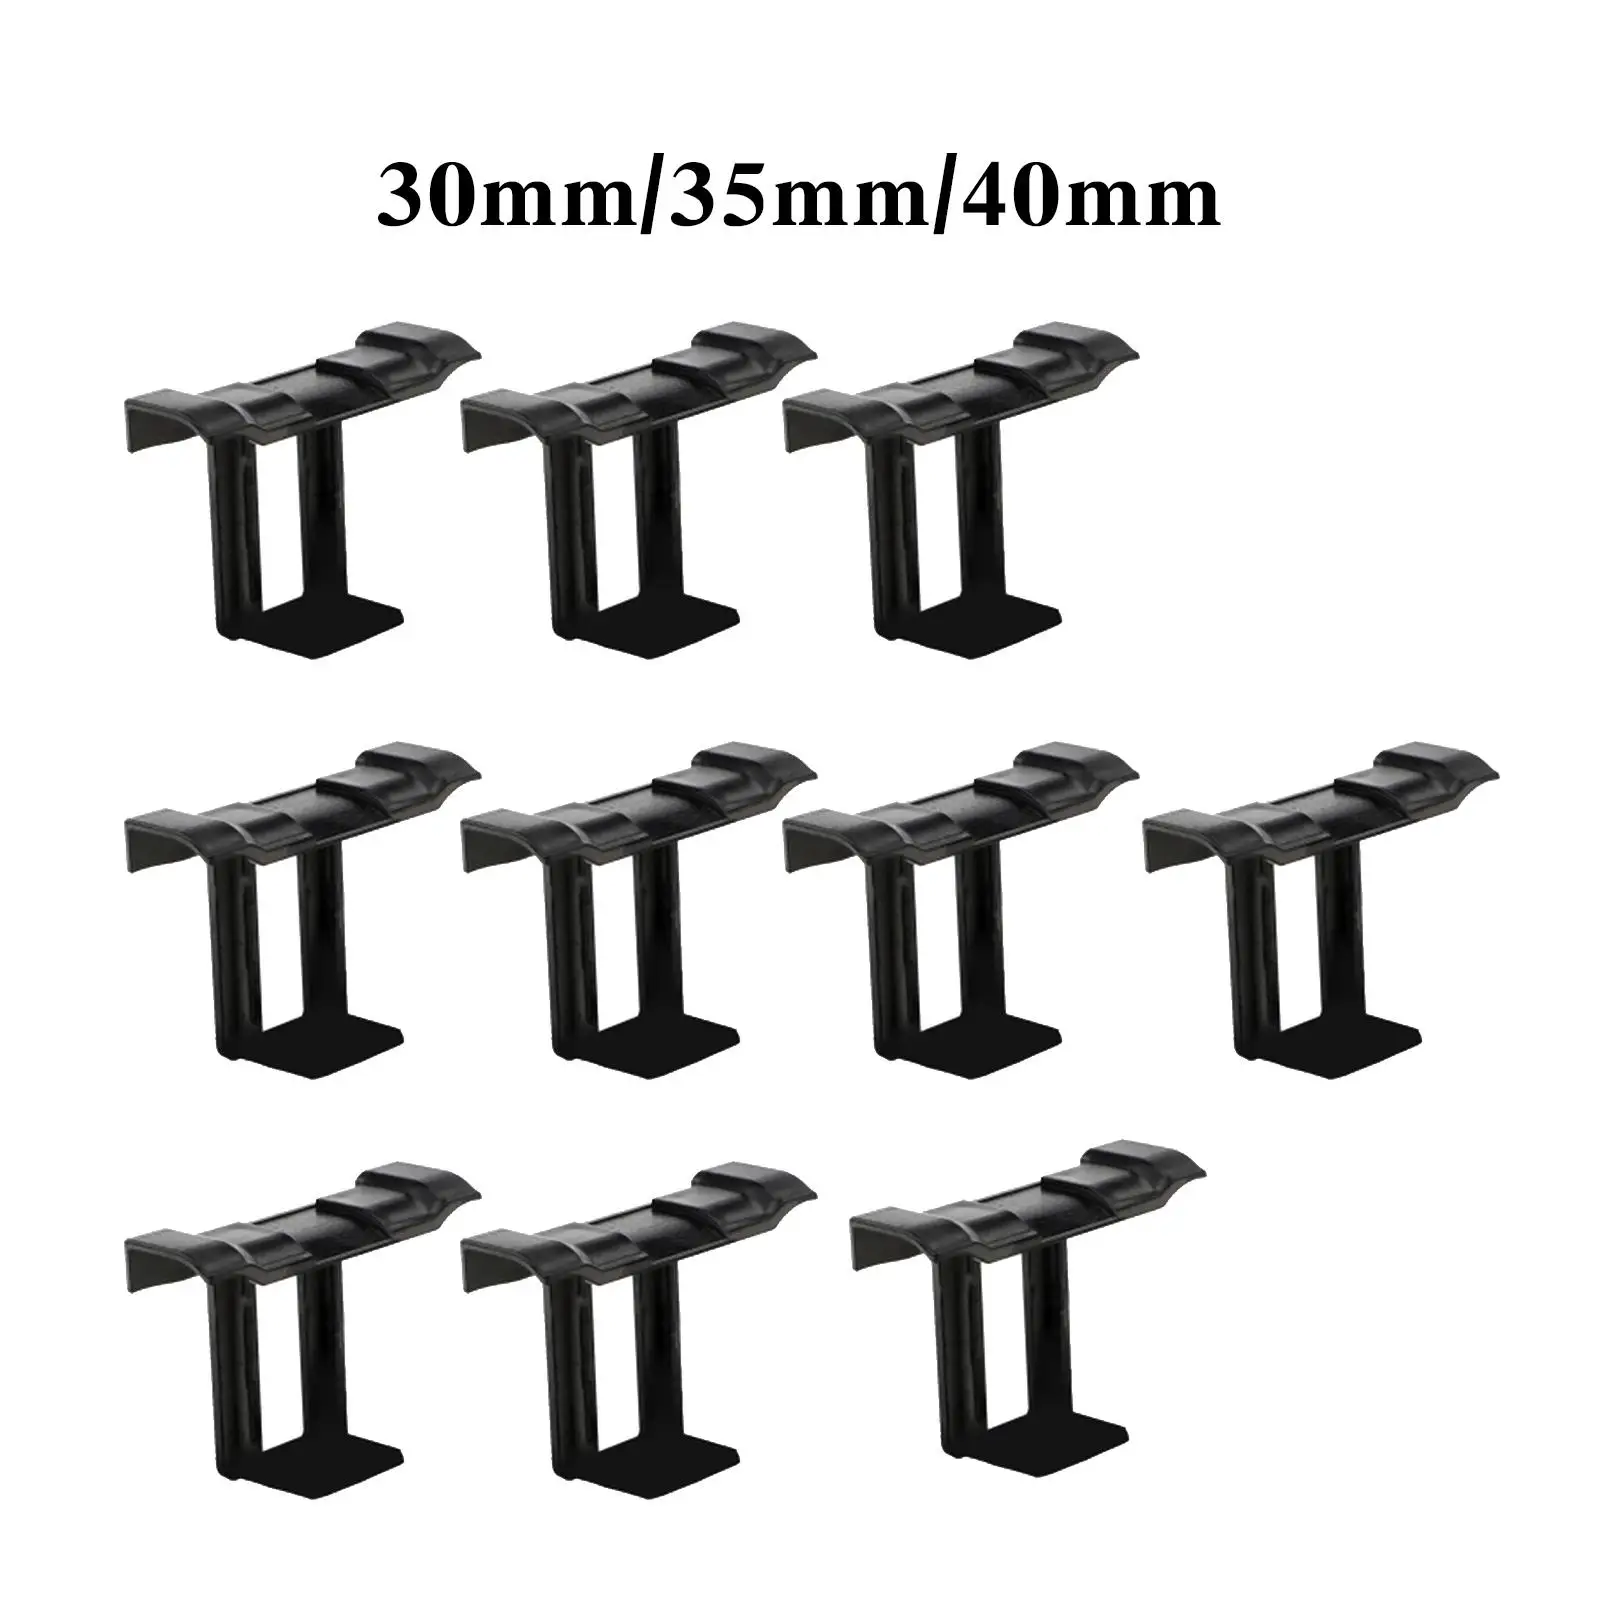 10 Pieces Solar Panel Remove Water Clips Auto Remove Stagnant Water Dust Pv Modules Cleaning Clips for Photovoltaic Panel